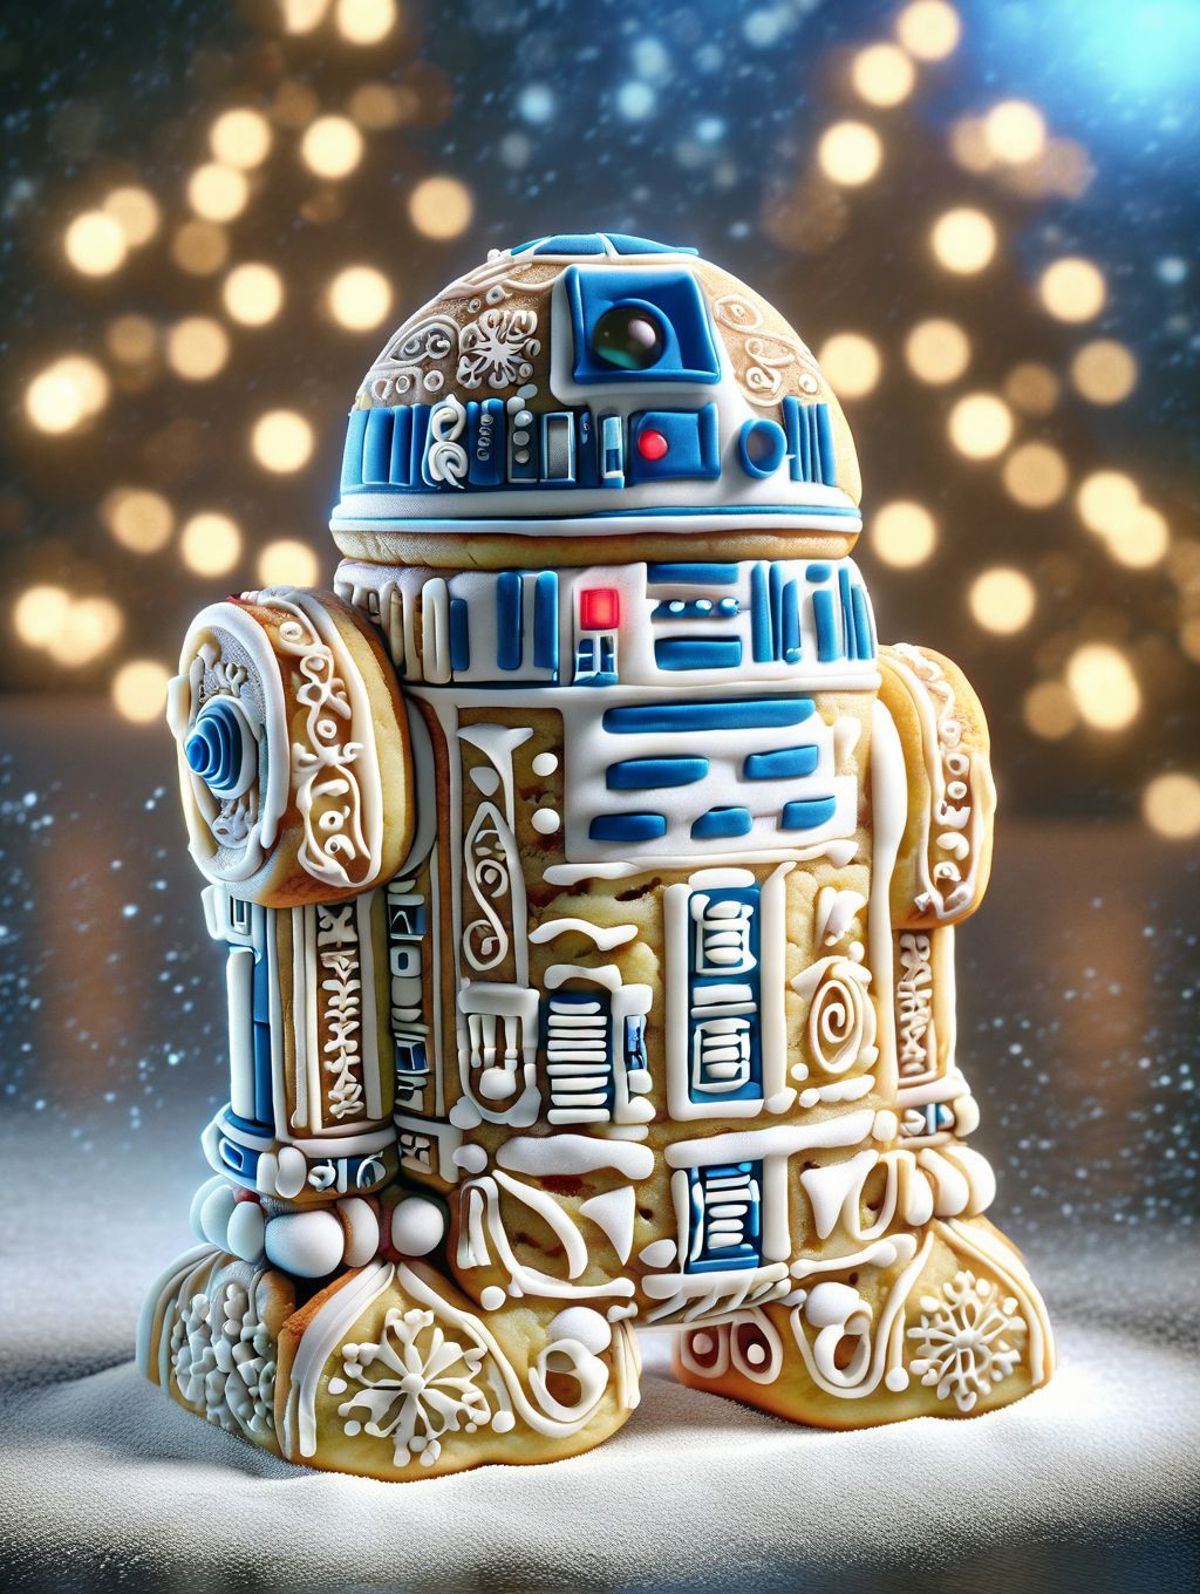 A R2D2 cake with blue and white frosting.